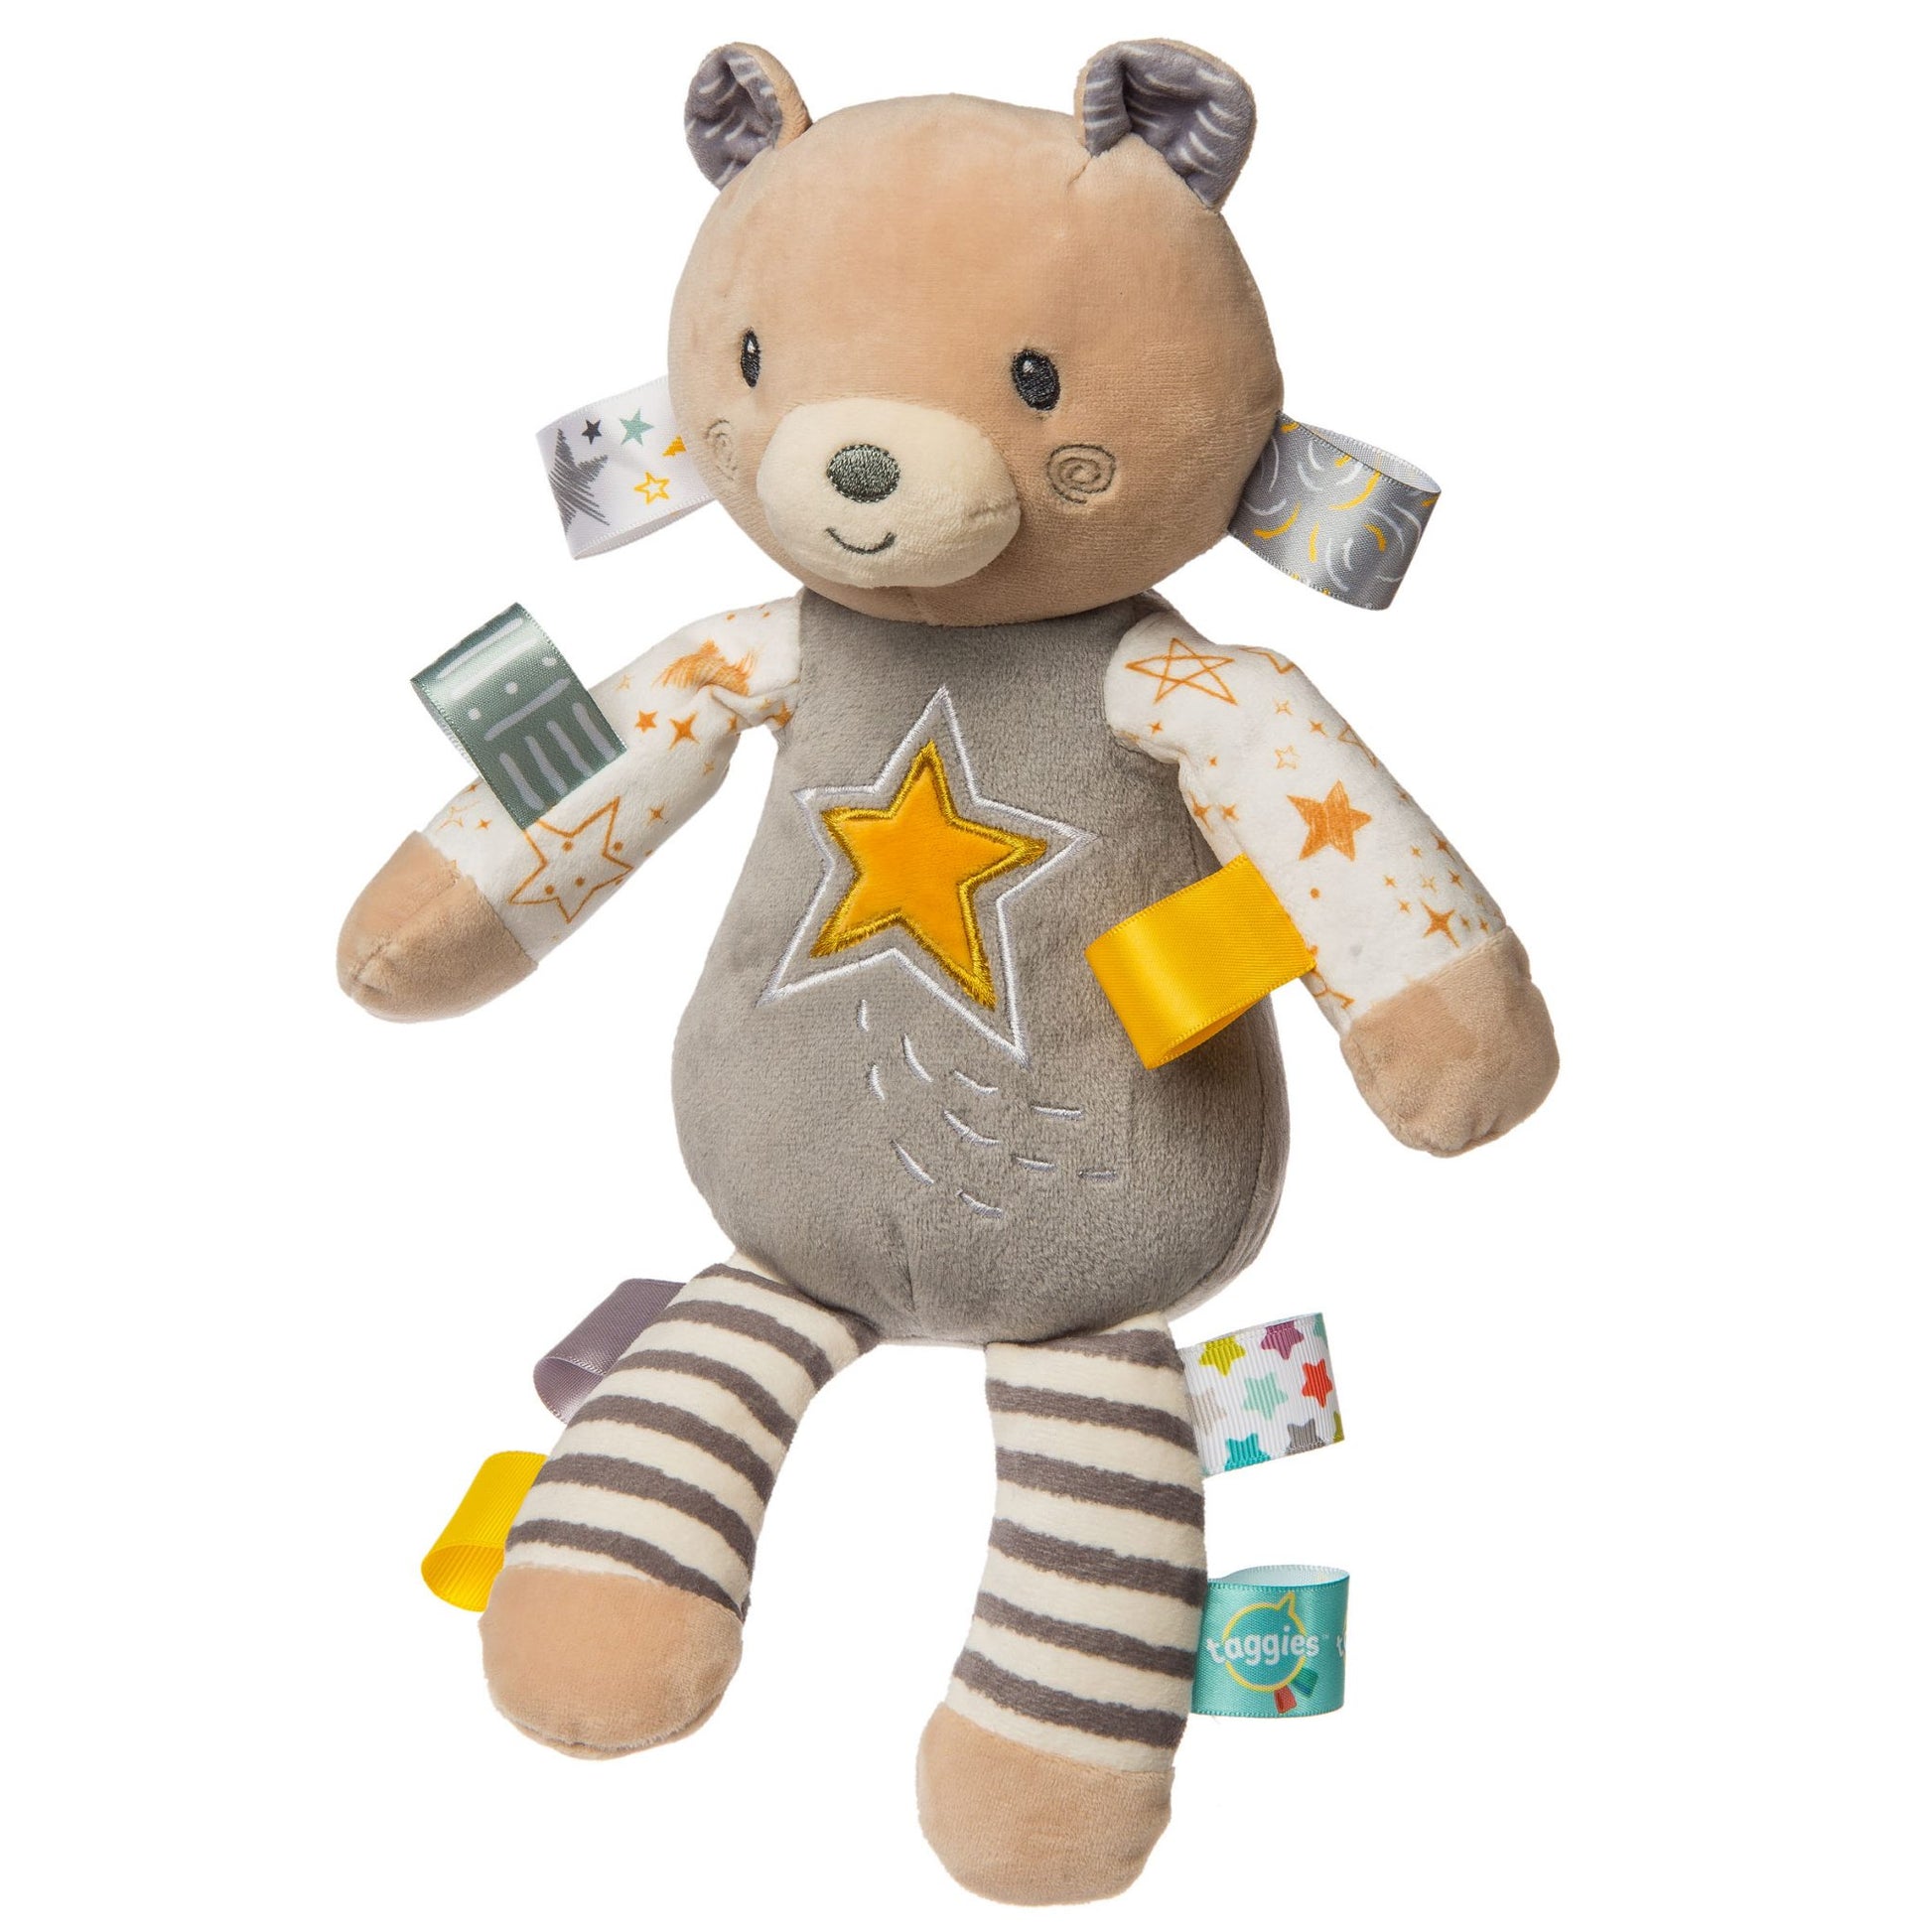 be a star soft toy on a white background